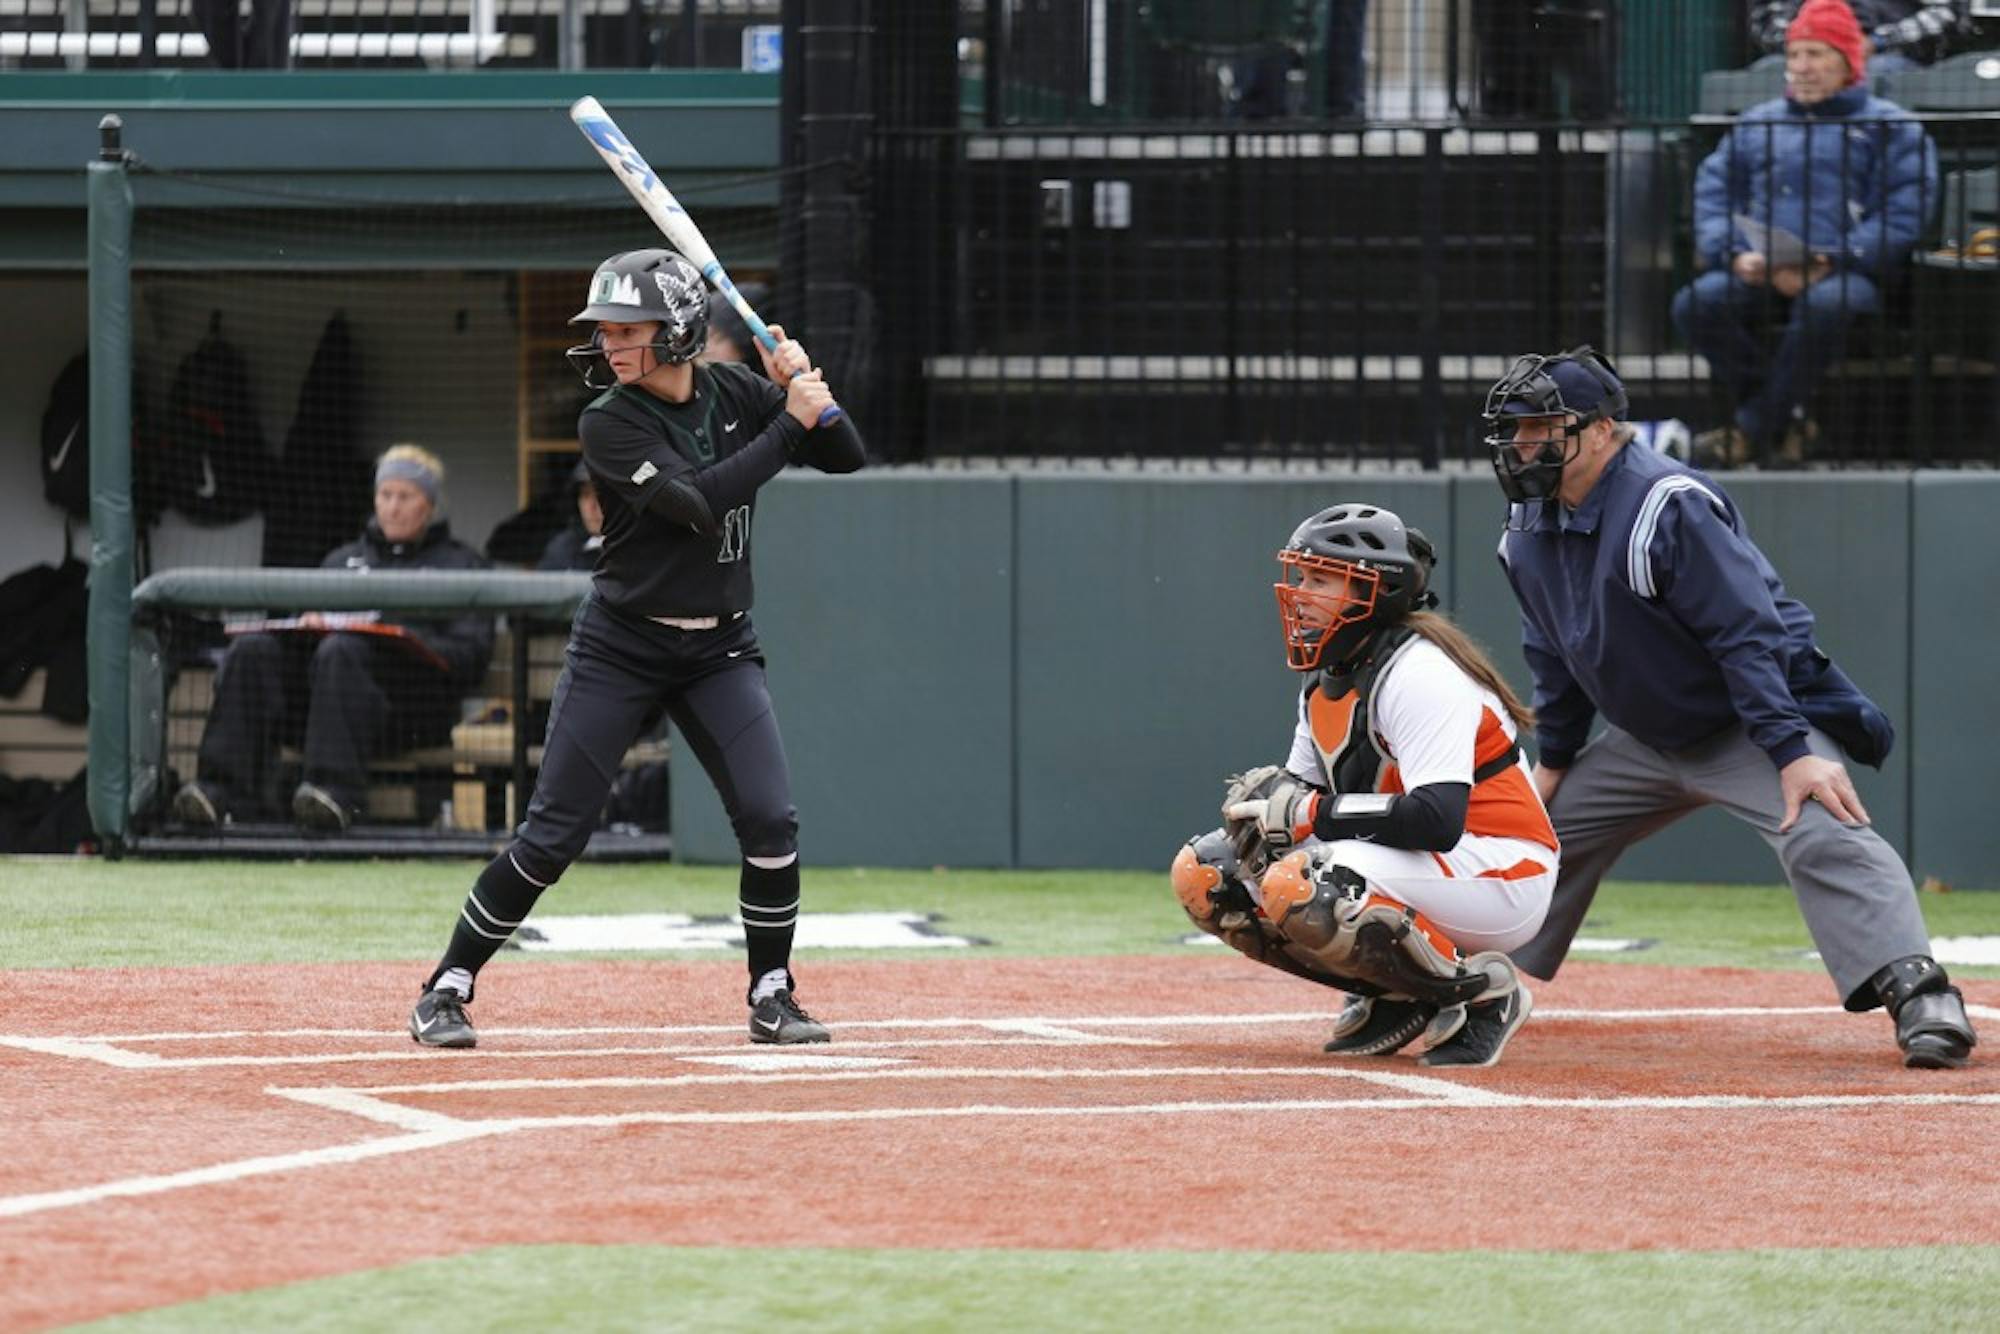 Softball is currently 10-13 overall and 4-2 in Ivy League play, winning two of three games in a series against both Columbia University and the University of Pennsylvania.